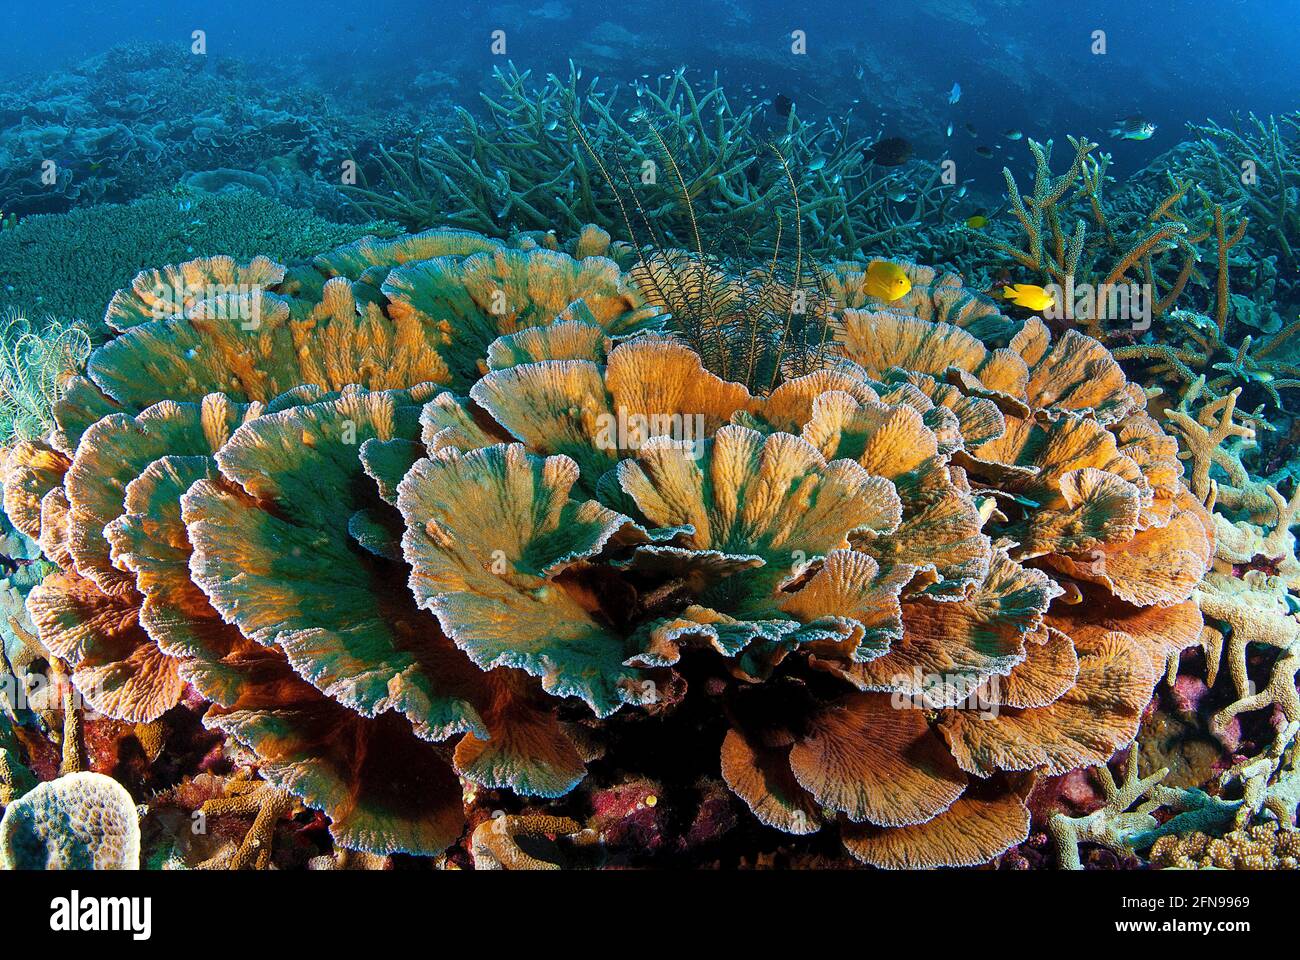 Lettuce and staghorn corals, Solomon Islands Stock Photo